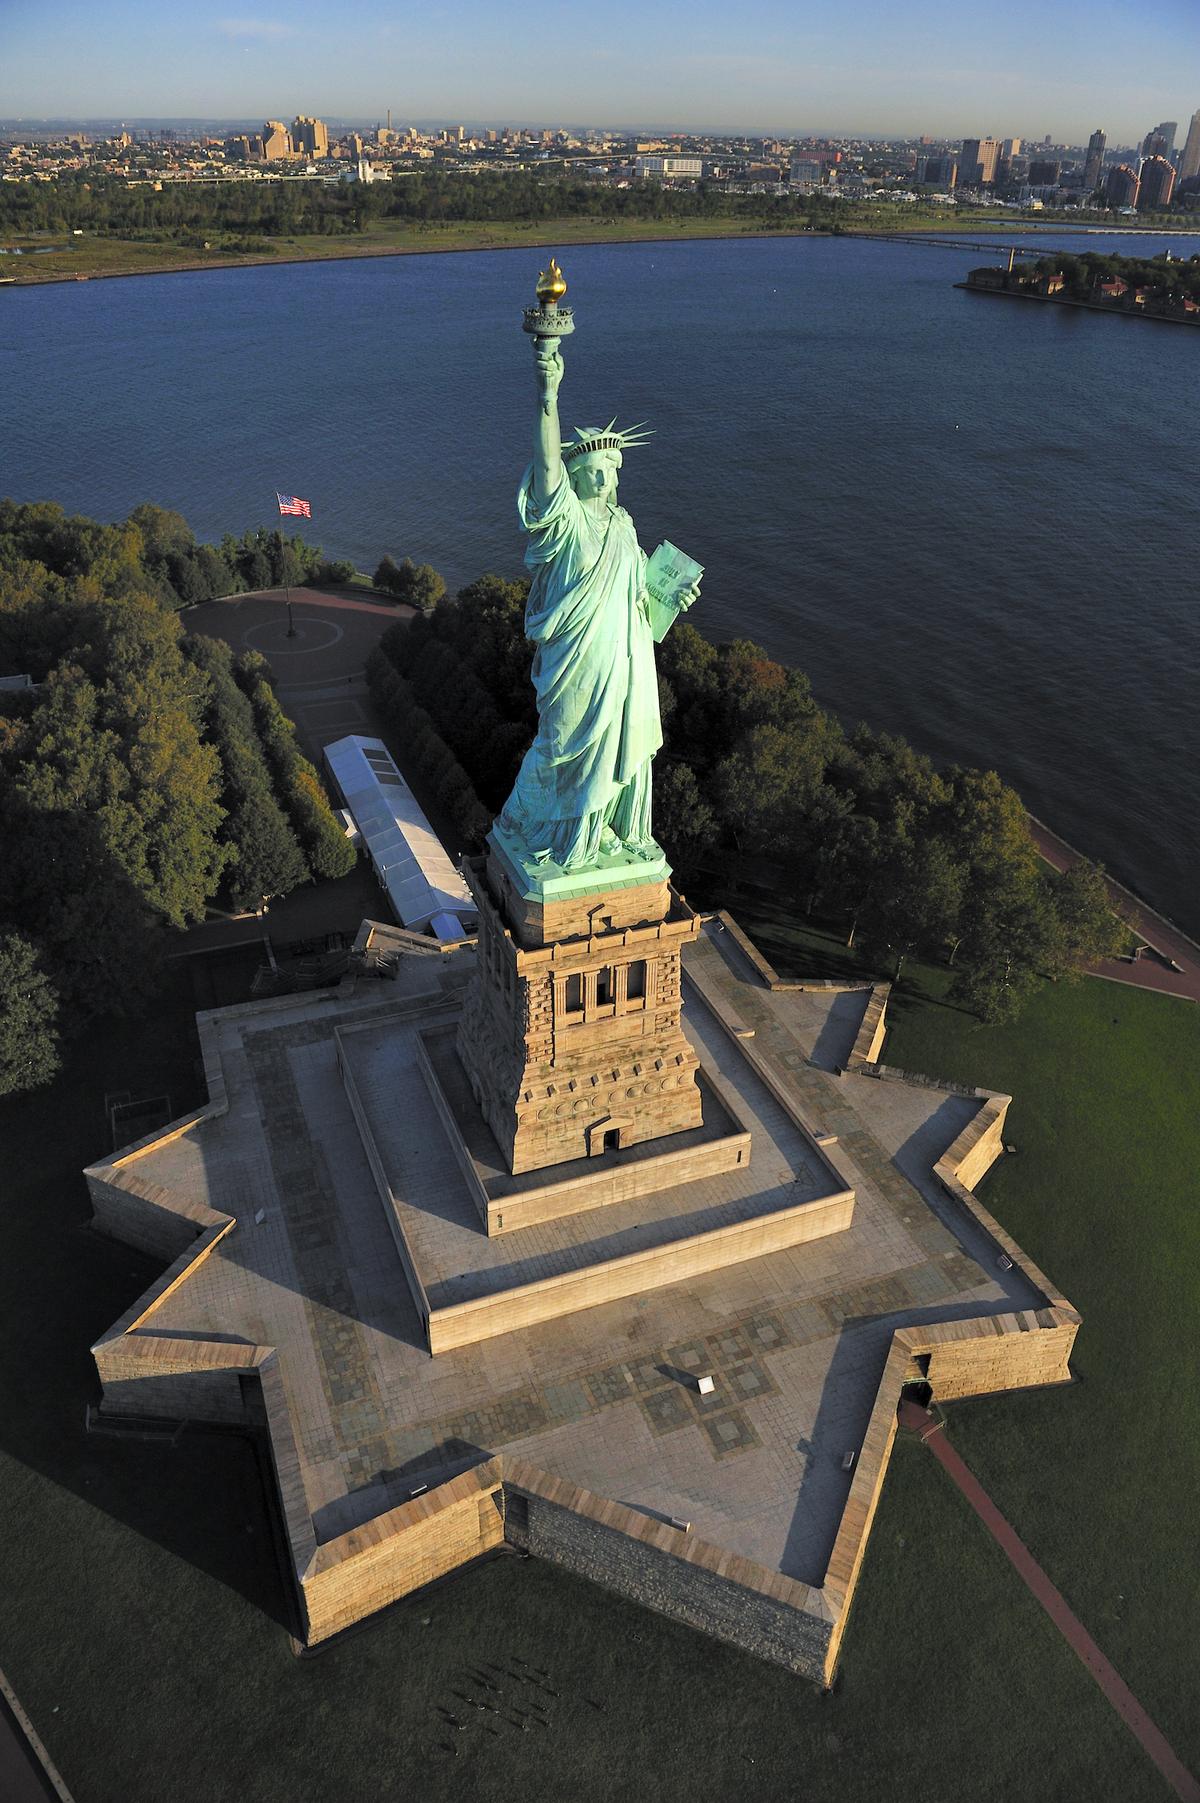 The structure of Fort Wood on Liberty Island in New York City now serves as the foundation of the Statue of Liberty. (T photography/Shutterstock)